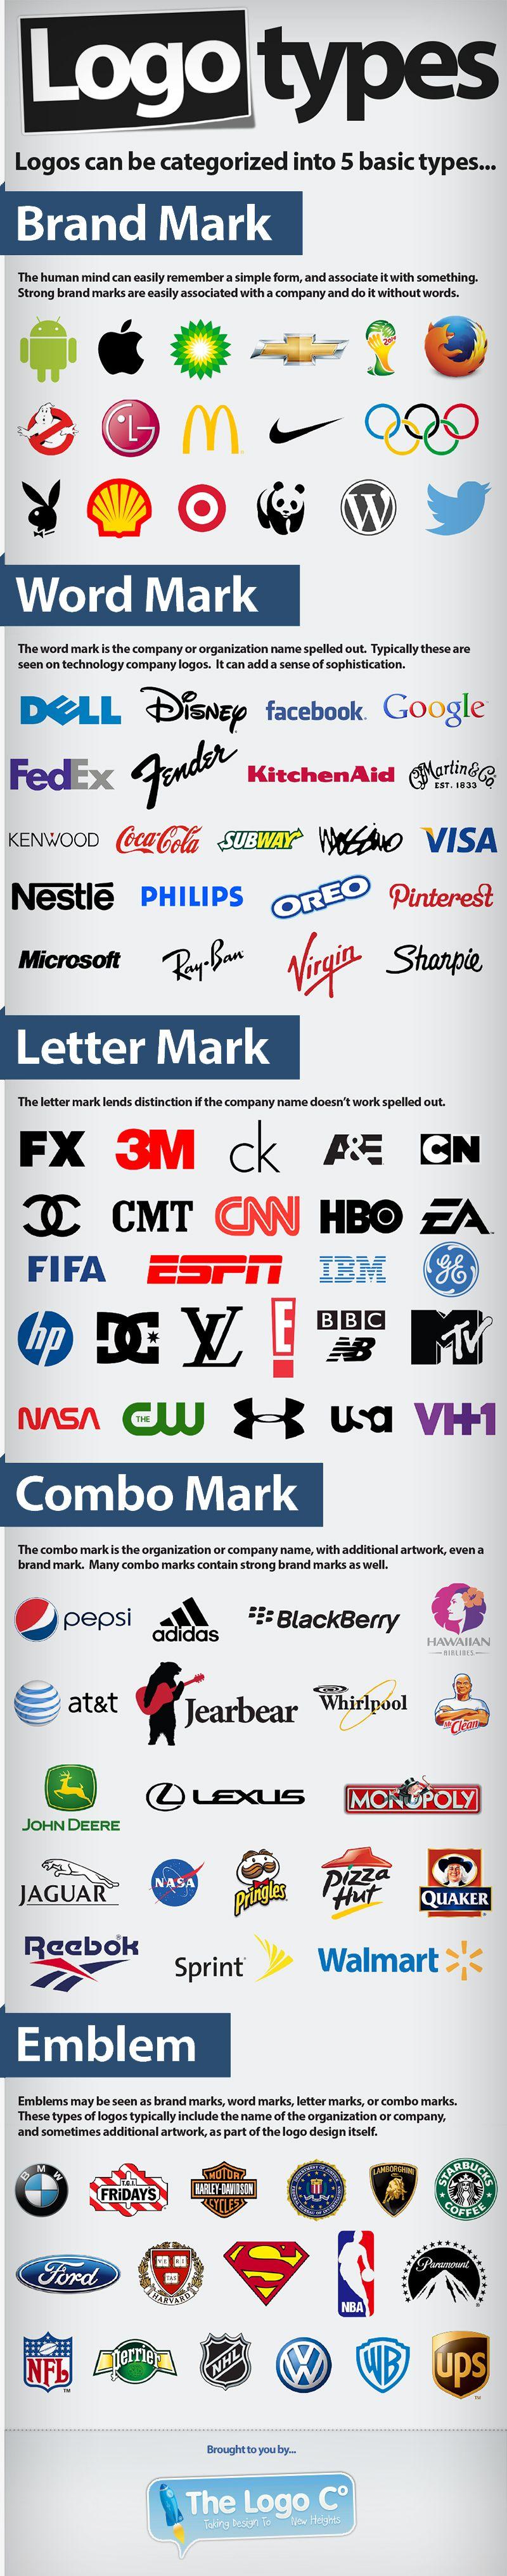 5 Letter Logo - The 5 Logo Styles - What's Yours? - The Logo Company